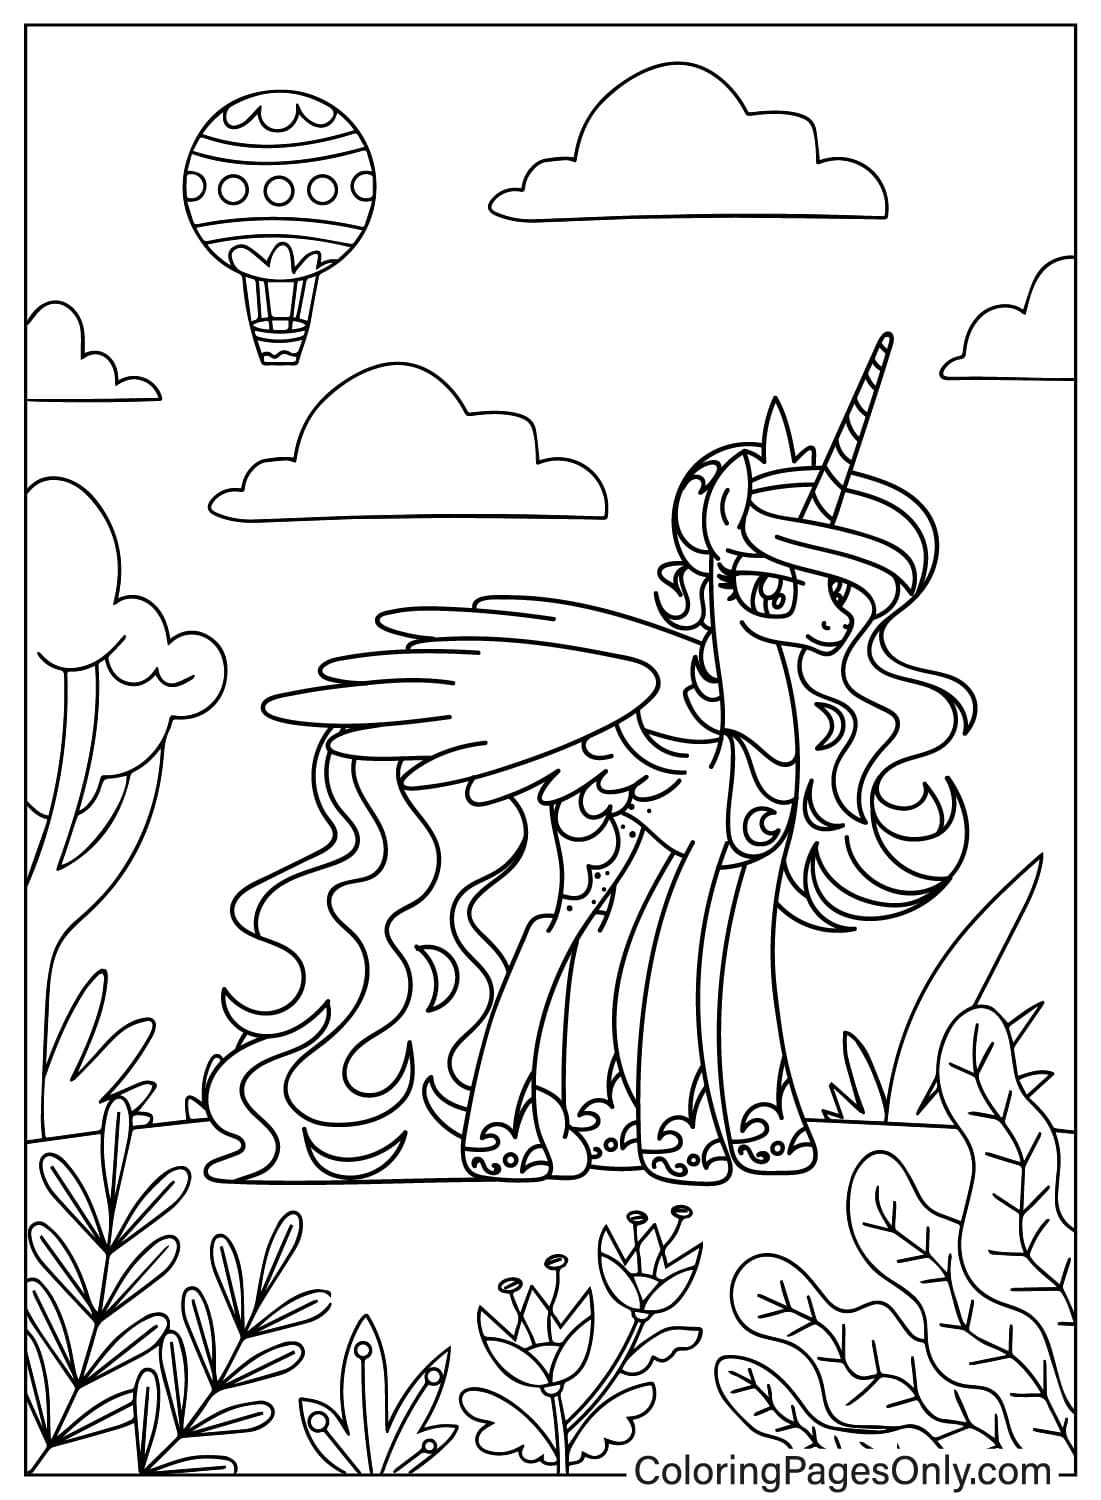 Princess Luna in The Forest Coloring Sheet from Princess Luna